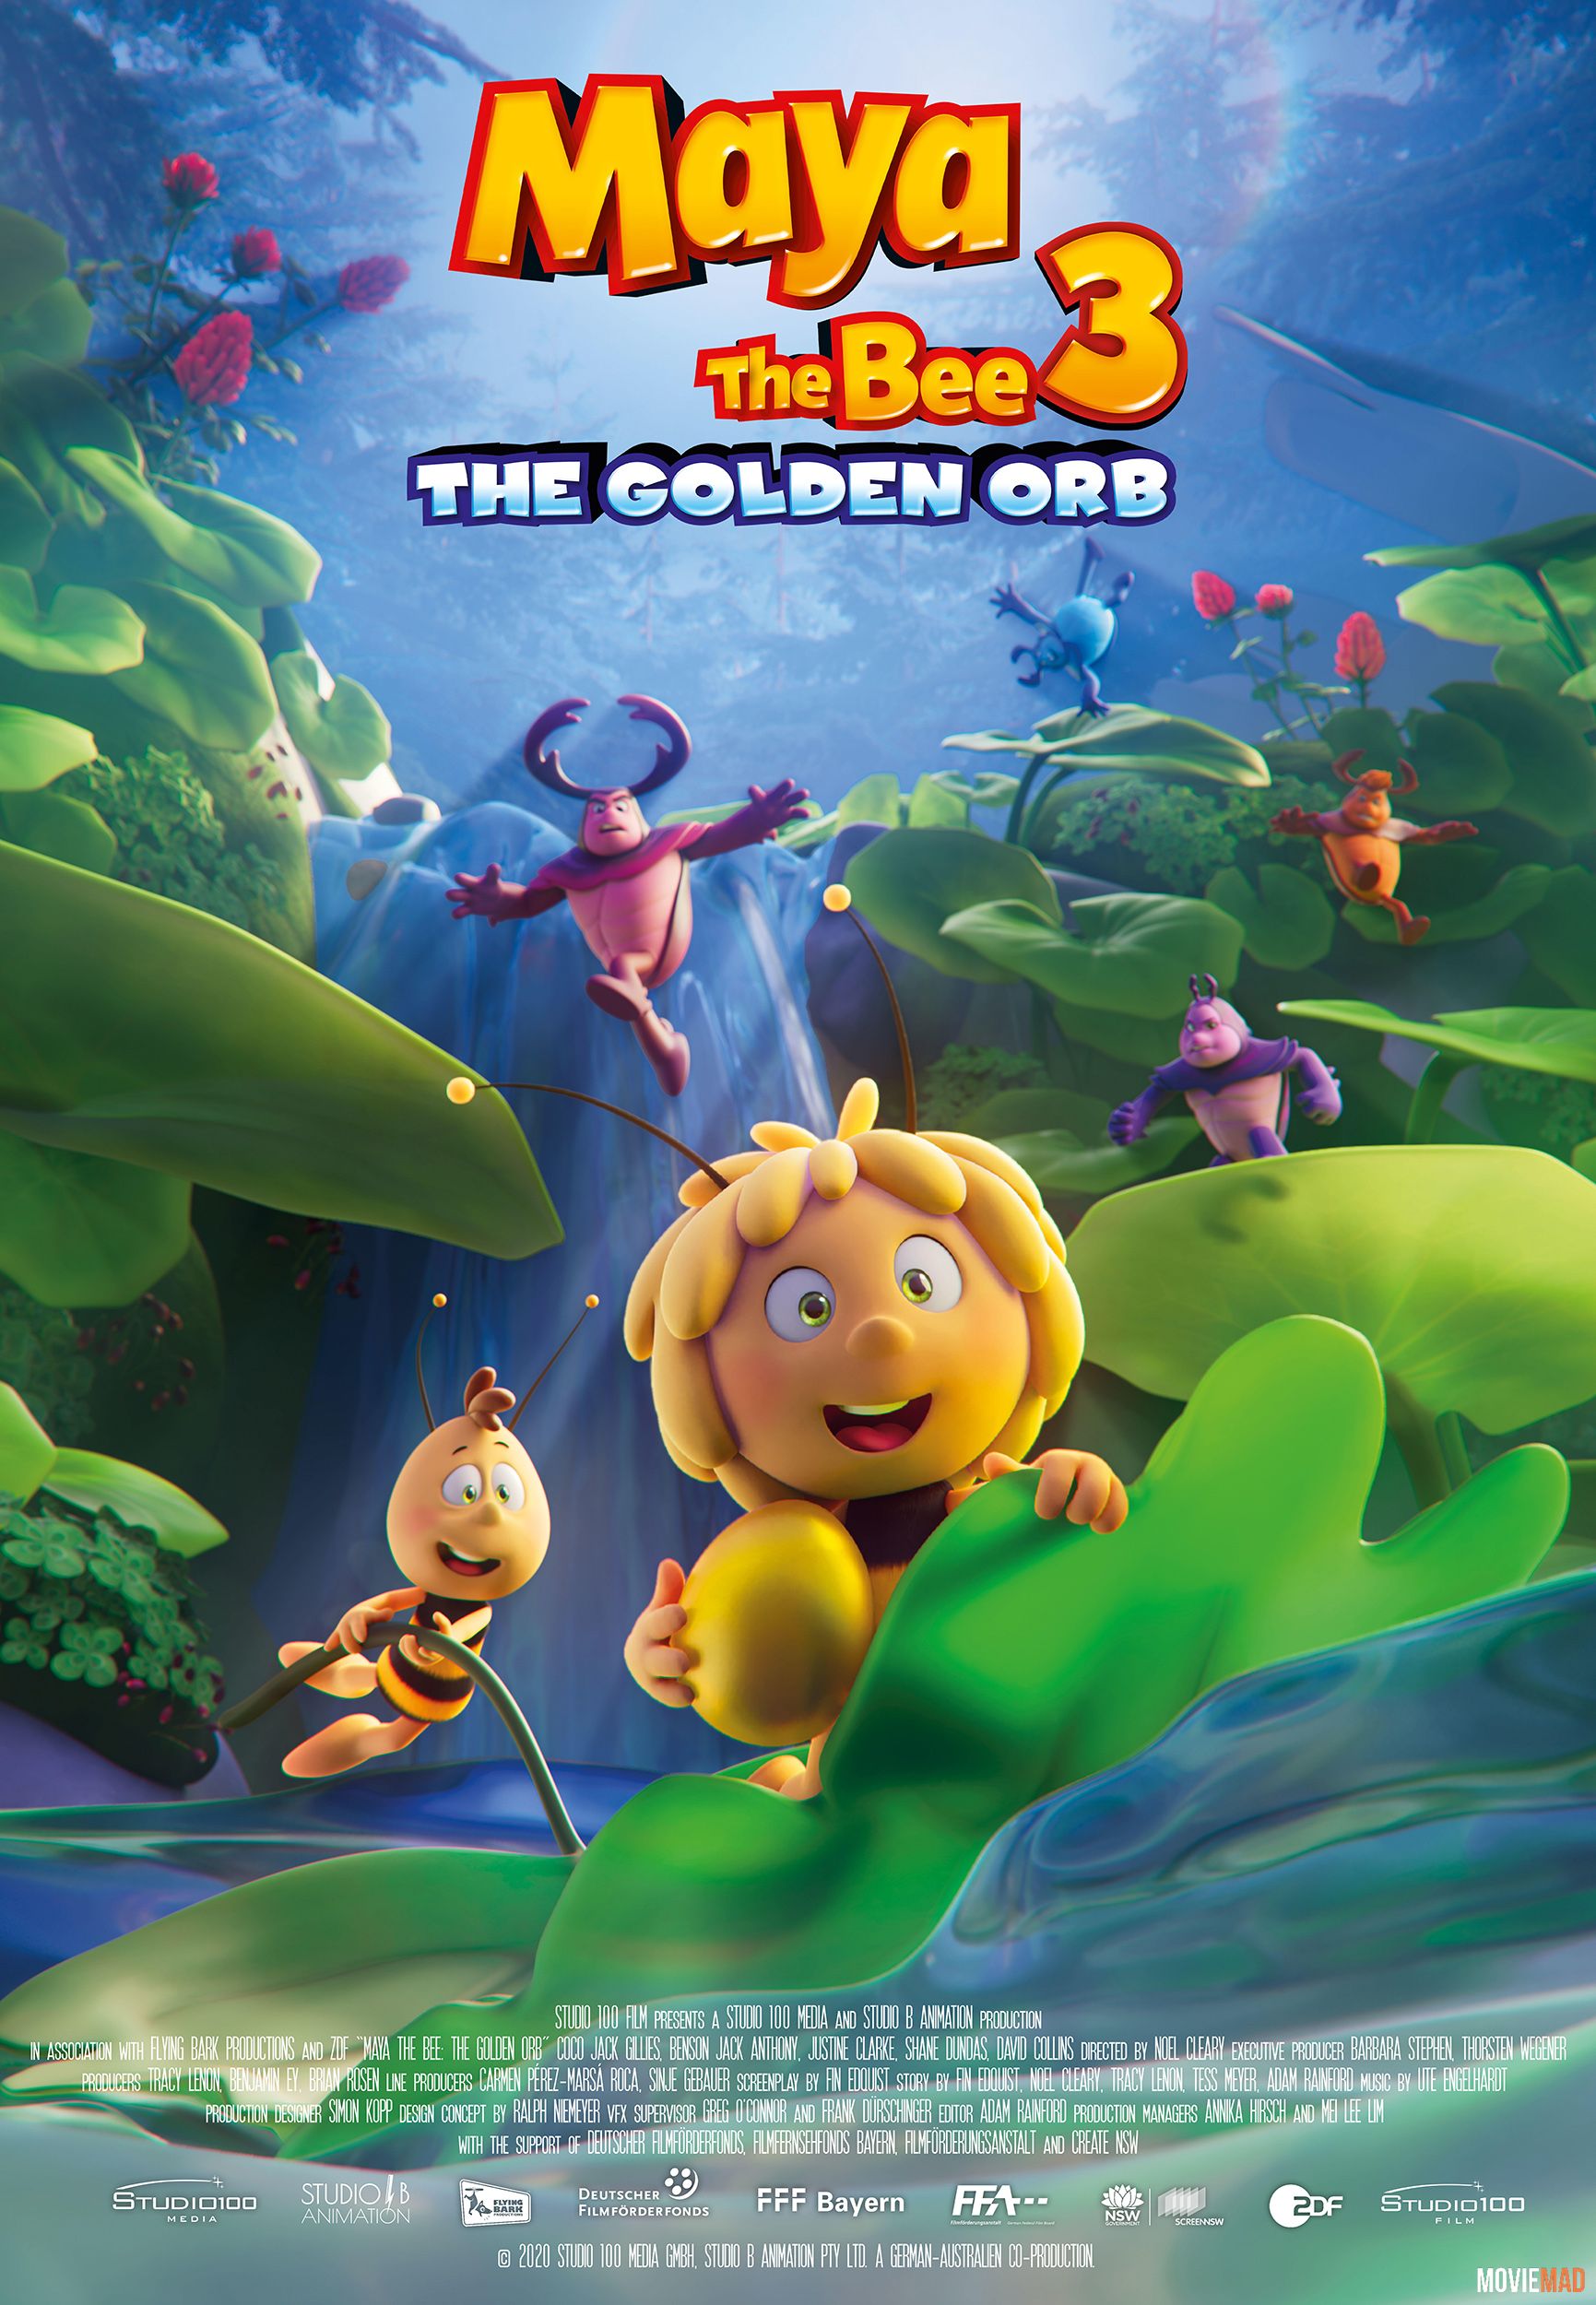 Maya the Bee 3 The Golden Orb (2021) Hindi Dubbed ORG HDRip Full Movie 720p 480p Movie download